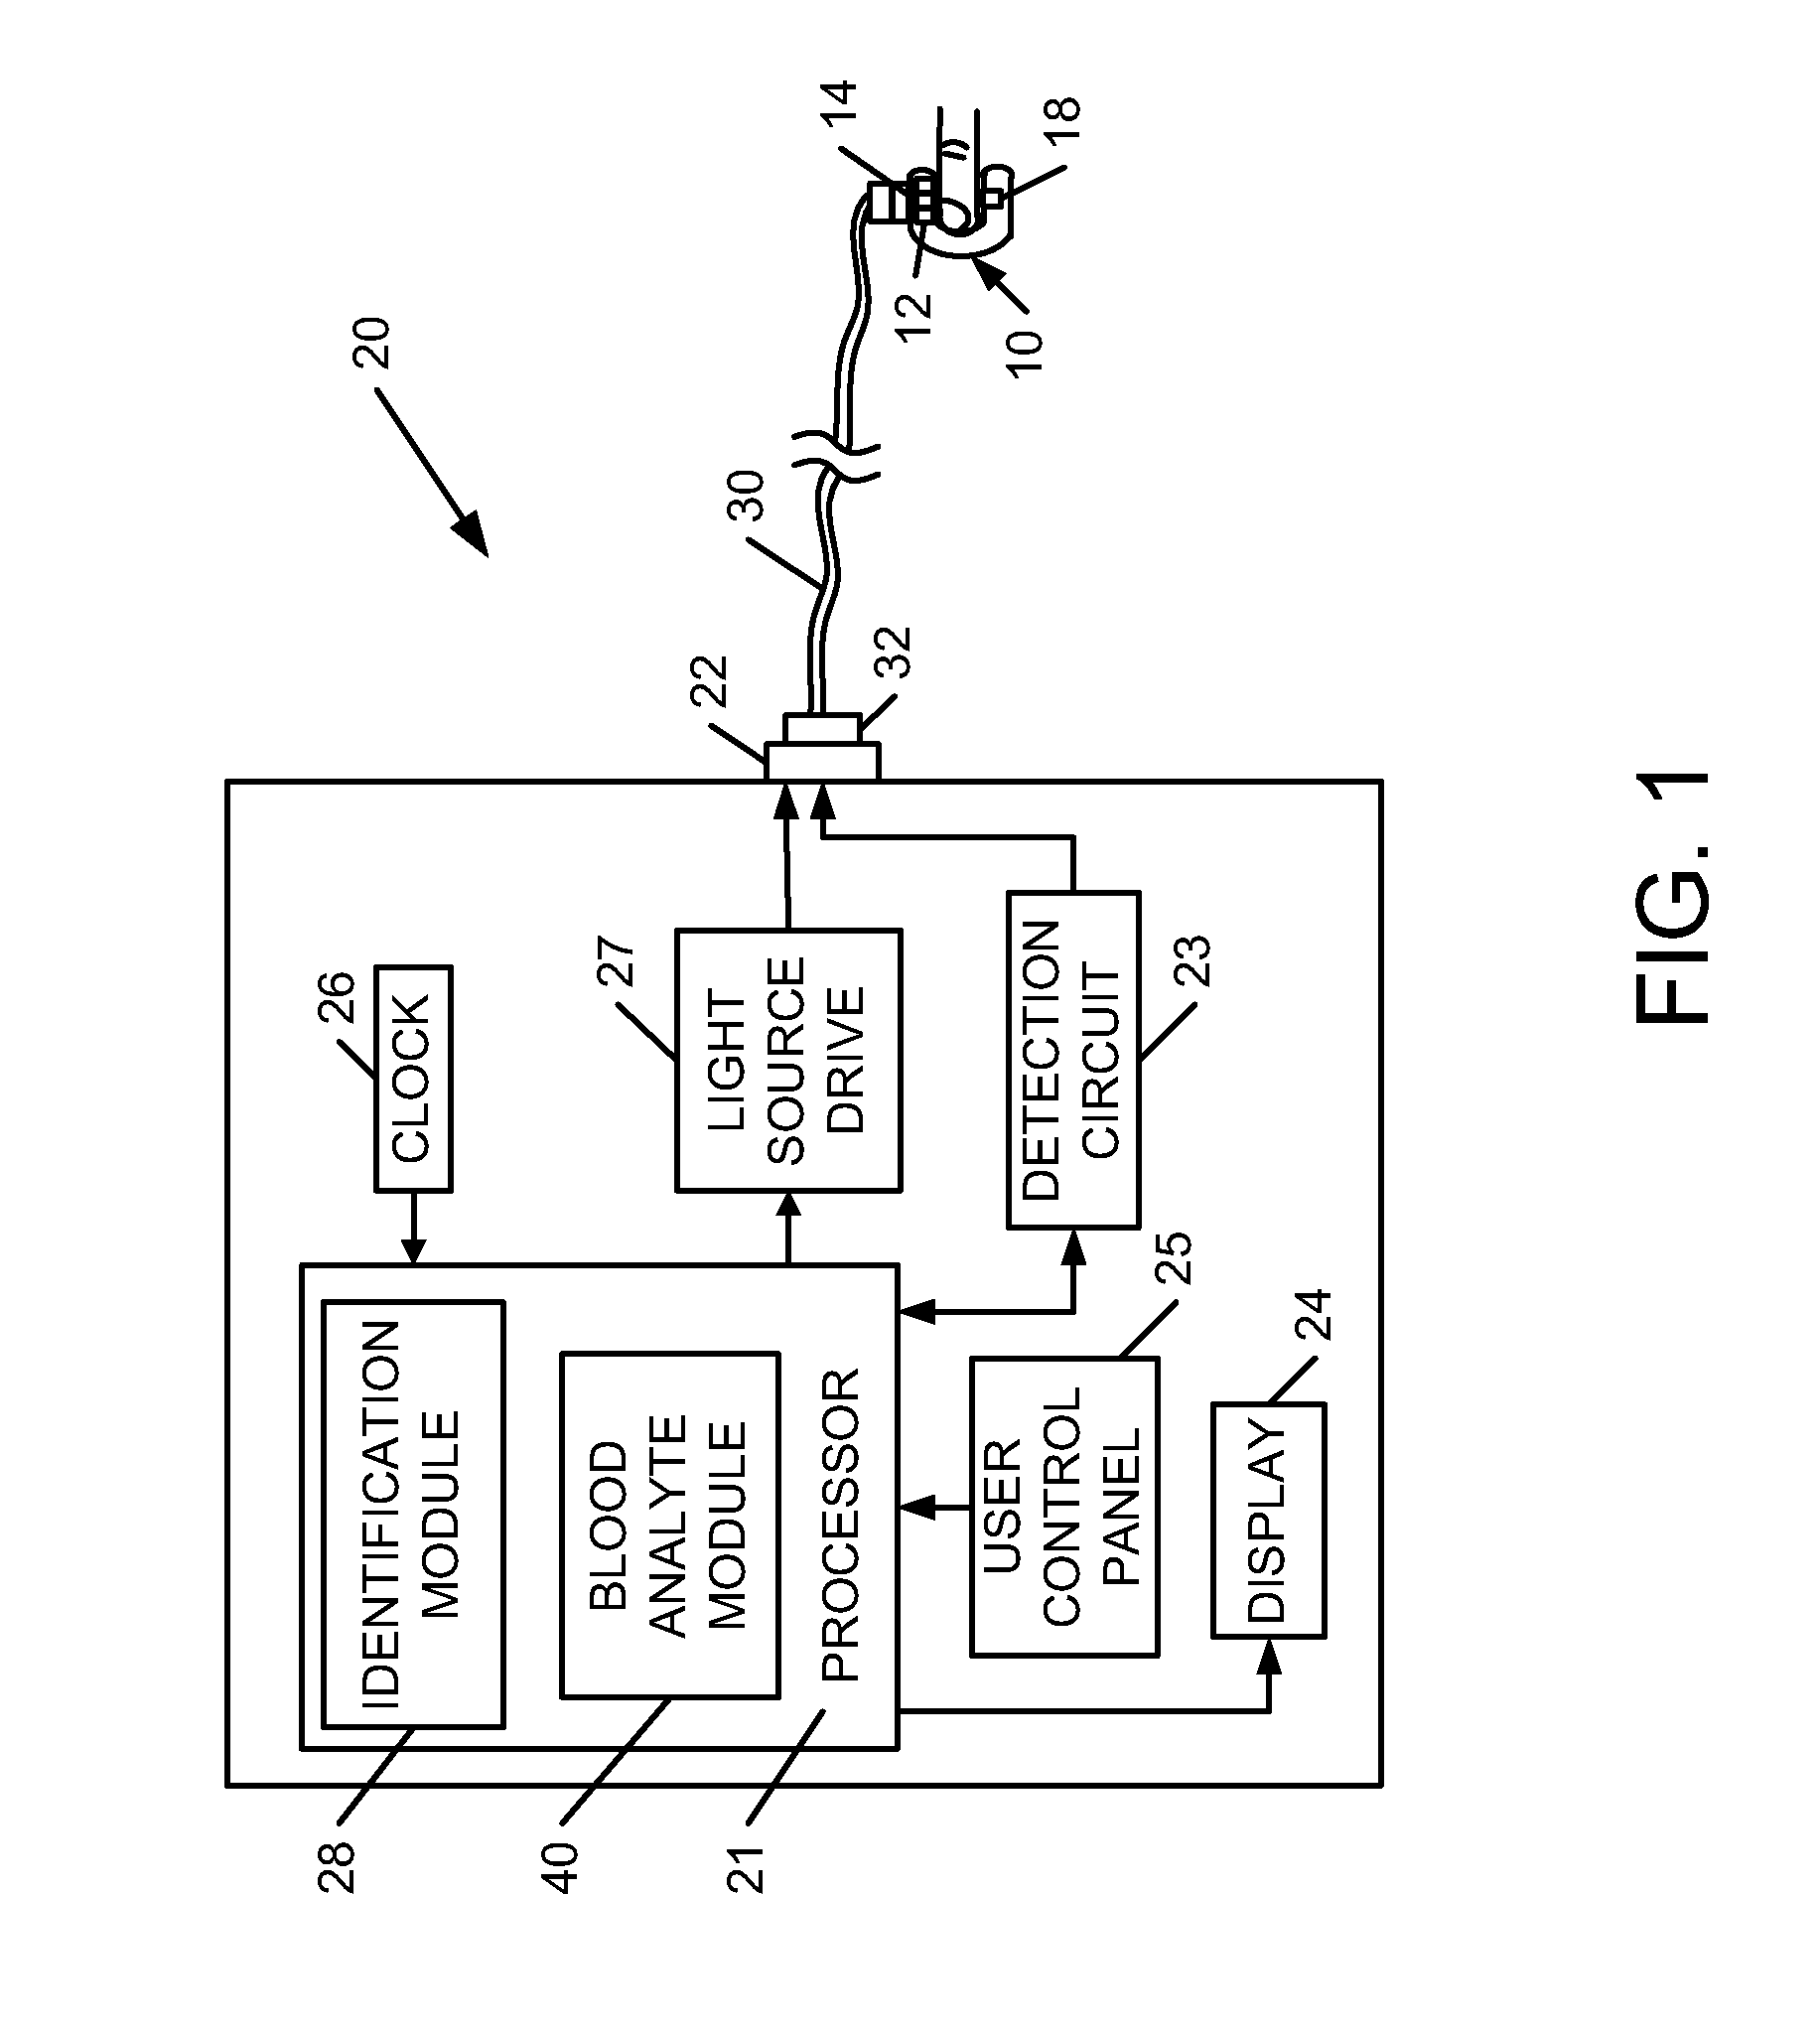 System for detecting potential probe malfunction conditions in a pulse oximeter